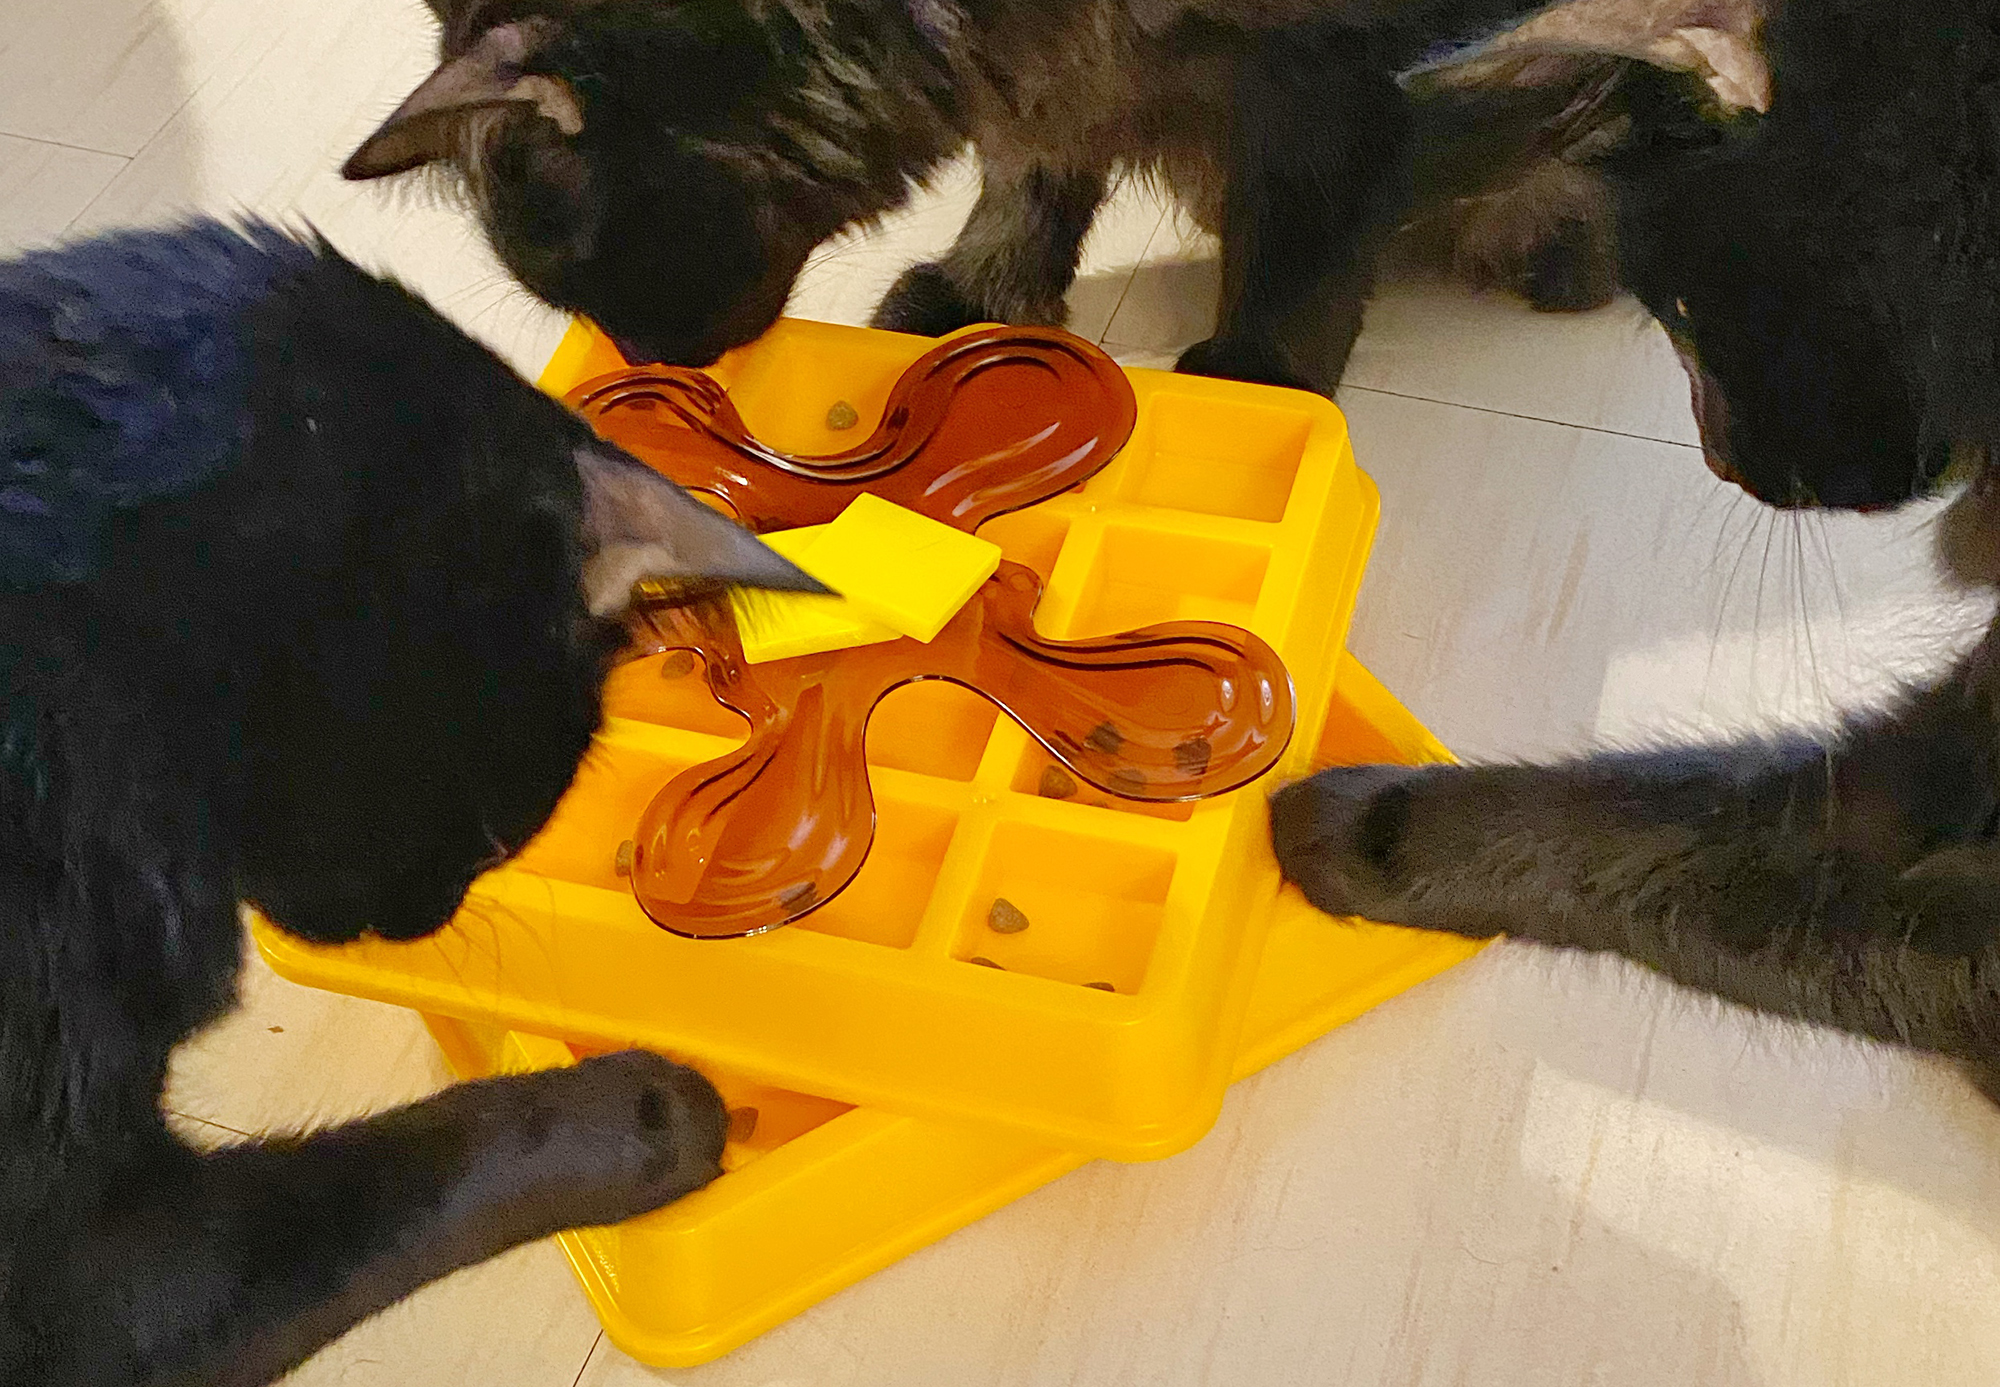 https://www.hauspanther.com/wp-content/uploads/2021/01/BreakfastFoodCatToys_feat.jpg